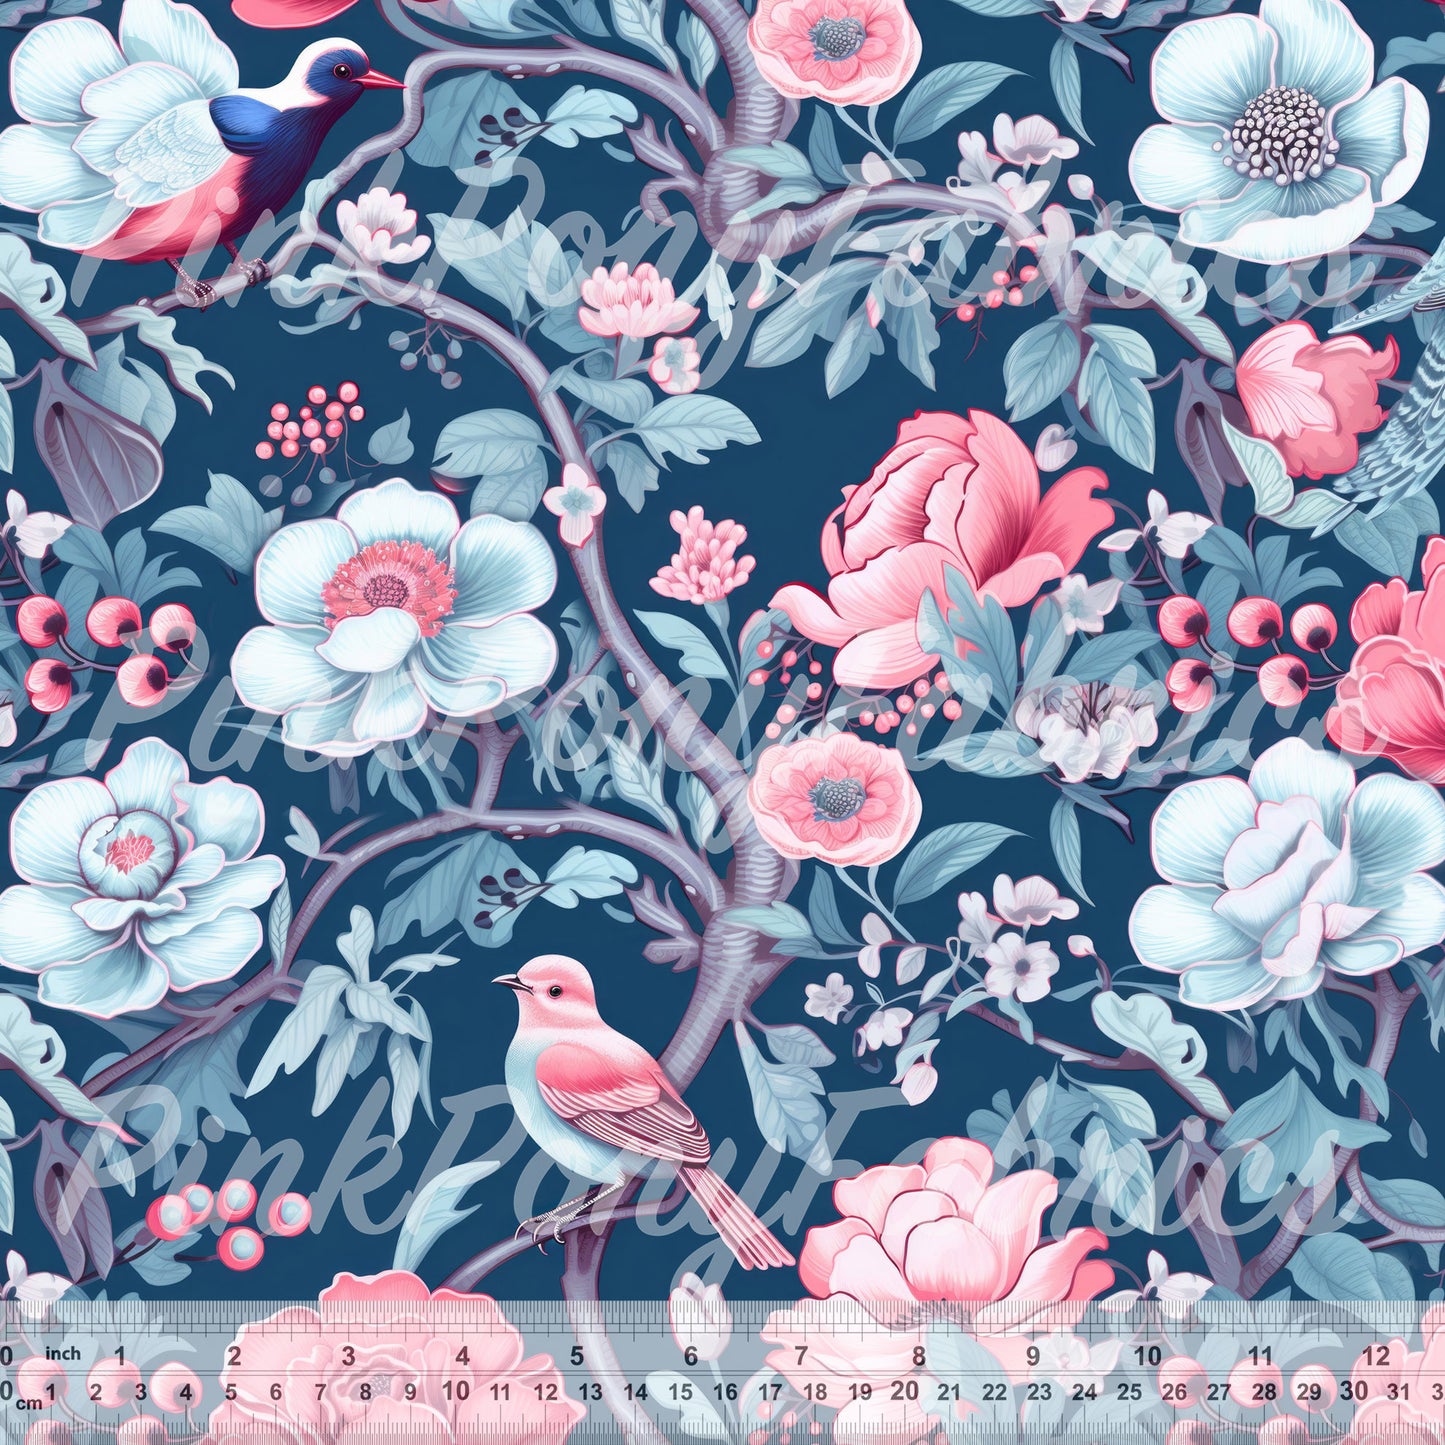 Floral Wallpaper with Birds